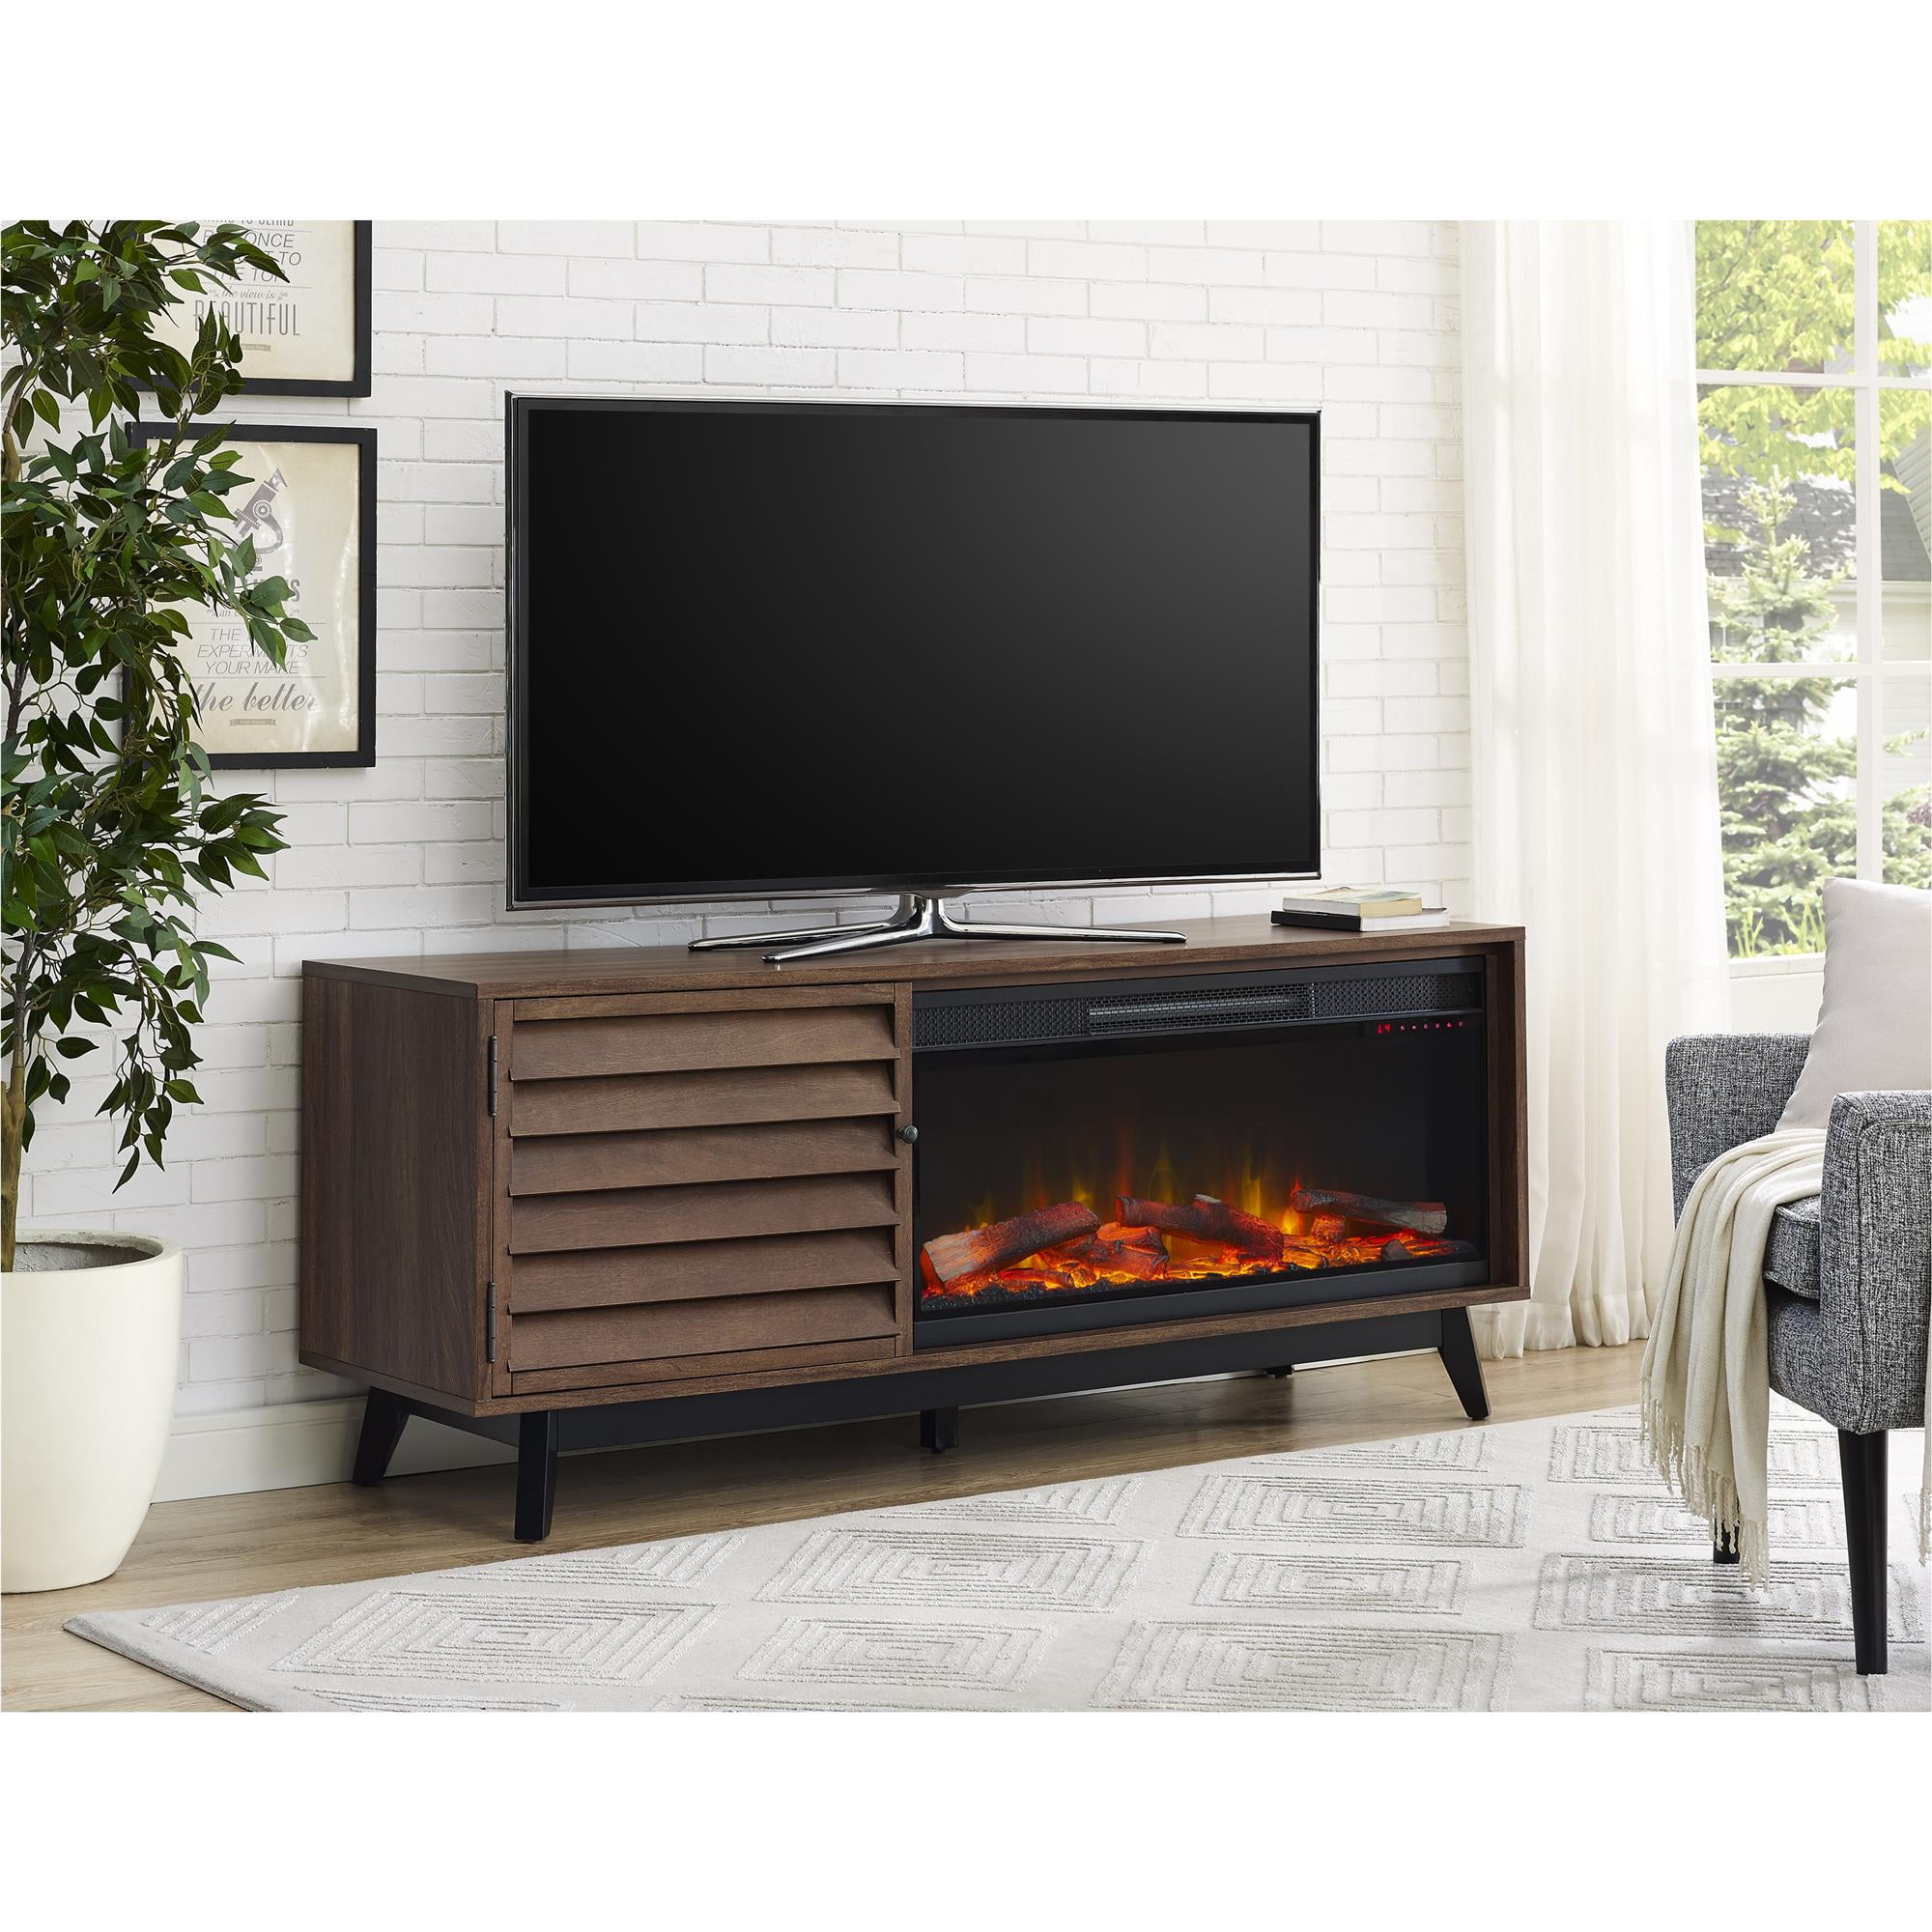 Ameriwood Home Vaughn Electric Fireplace TV Stand Walnut 